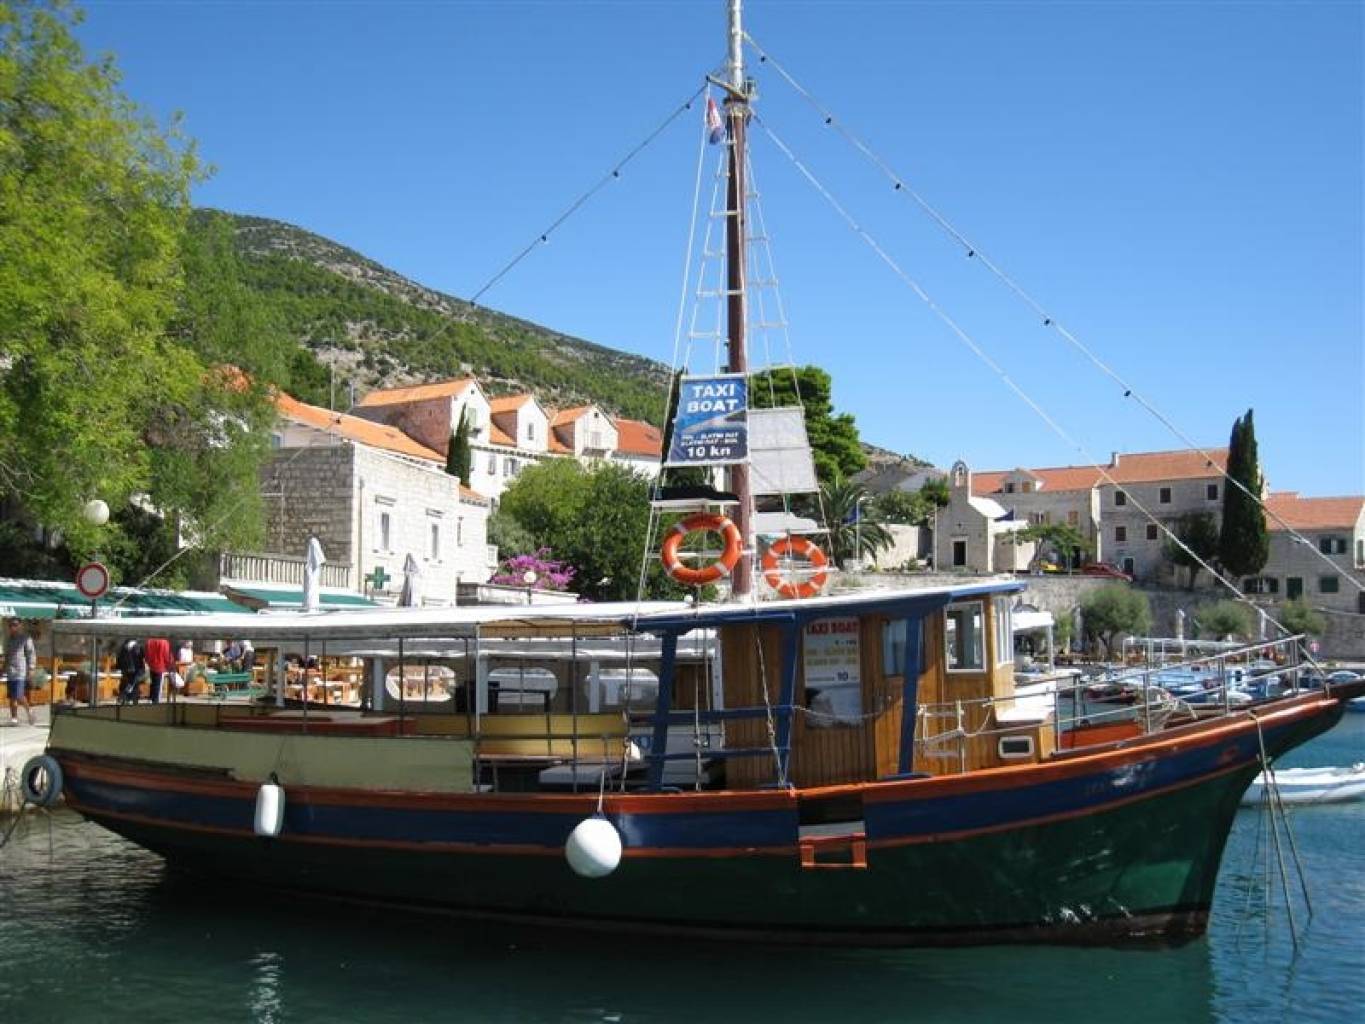 Taxi boats run throughout the day from the harbour to Zlatni Rat, for days when you don't feel like walking!